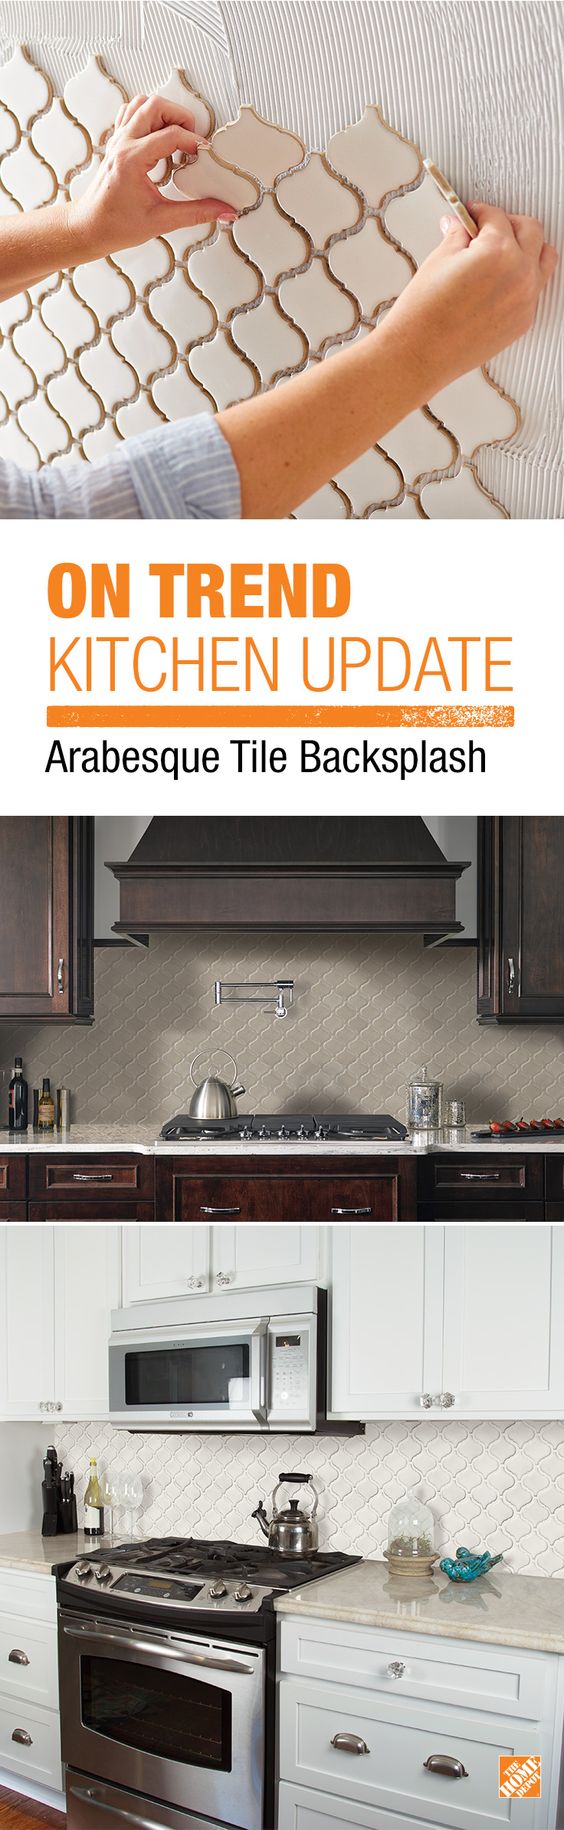 Stay under budget on your DIY kitchen project with MS International Bianco Arabesque Ceramic Mosiac Wall Tile. This affordable tile features a mesh sheet for easy installation. In elegant neutral shades, this glossy porcelain creates a distinct pattern for various install projects in bathrooms, kitchens and other residential or commercial spaces.